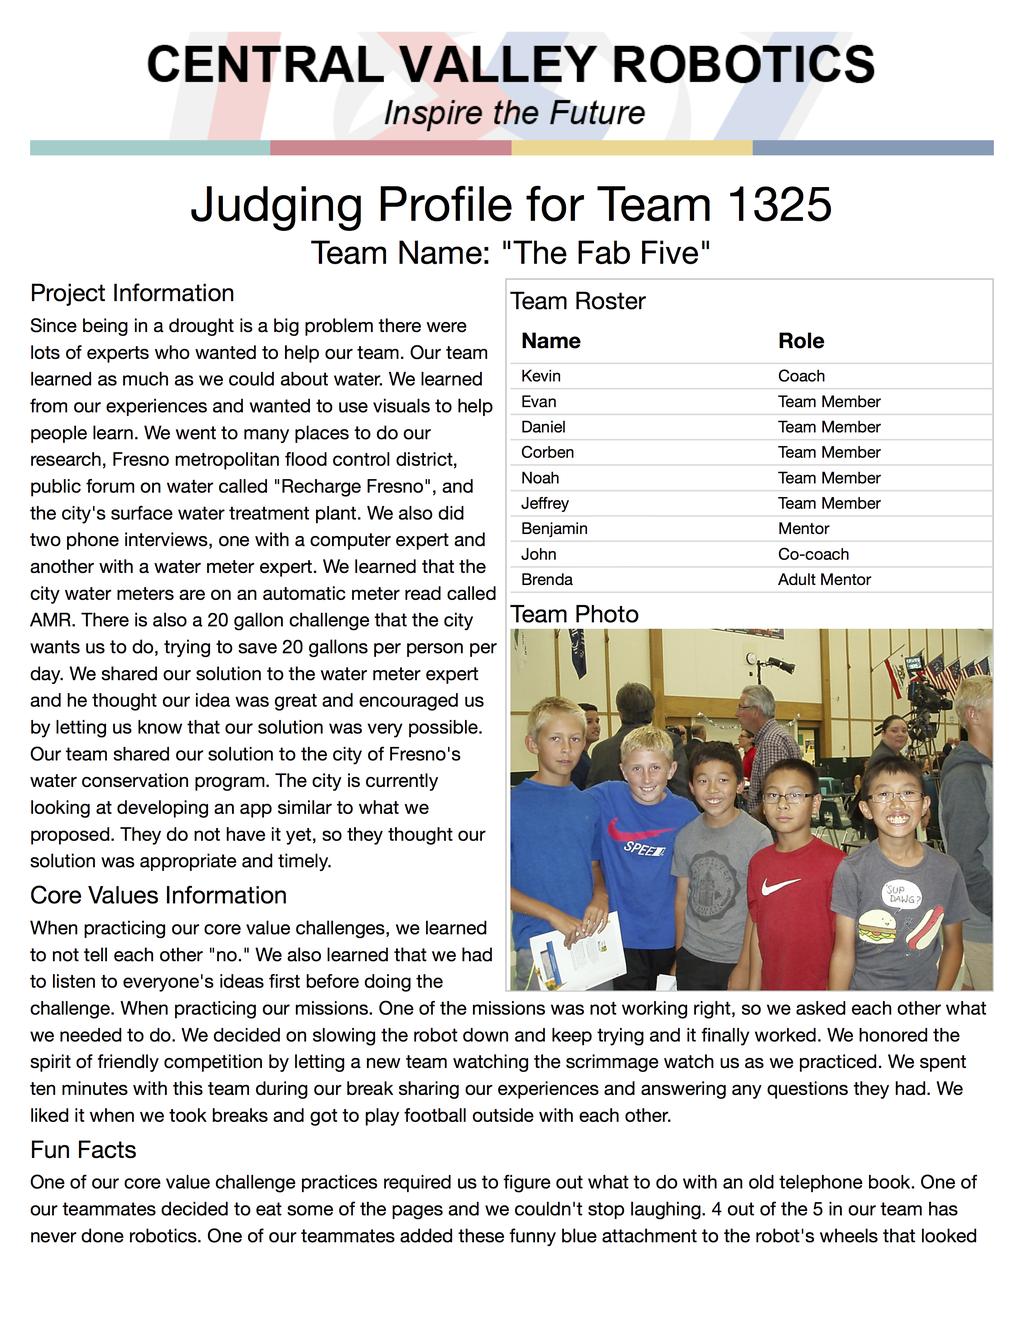 Example Profile Judging Profile for Team 1325 the Fab Five, from